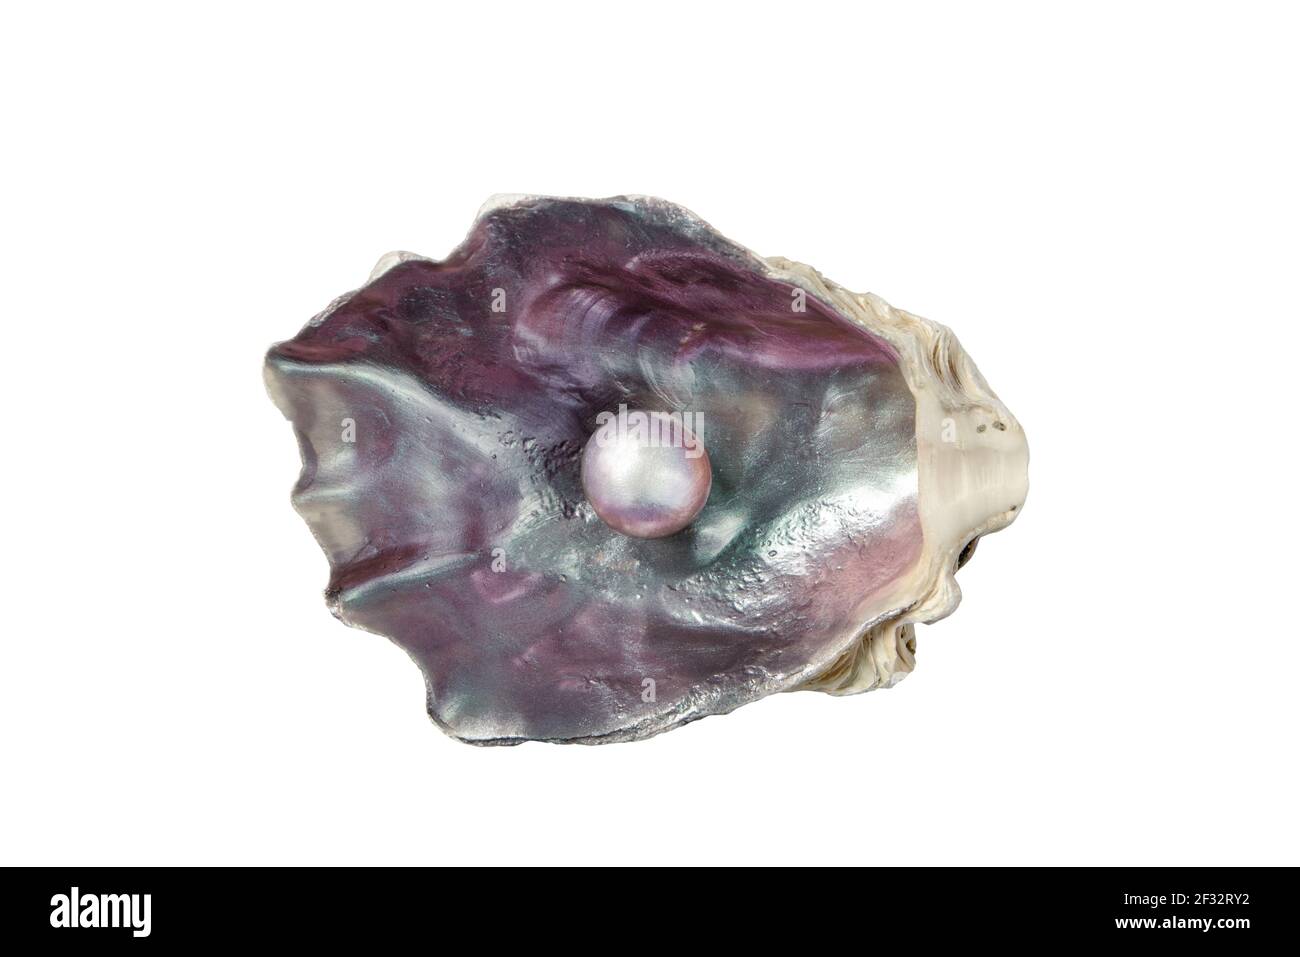 Shiny pearl in the purple iridescent oyster shell isolated on white Stock Photo